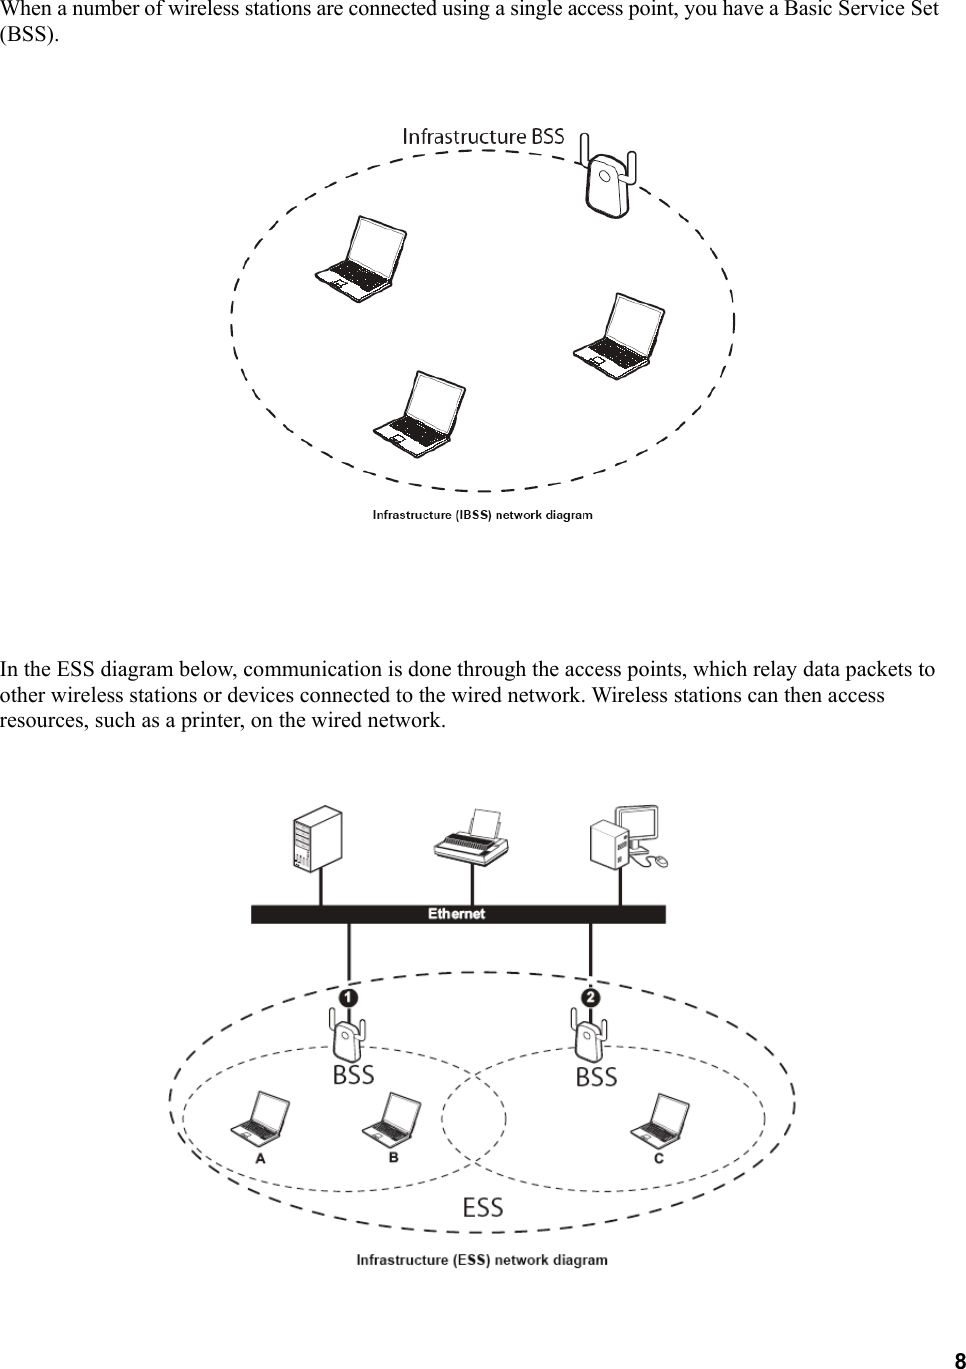 8  When a number of wireless stations are connected using a single access point, you have a Basic Service Set (BSS).         In the ESS diagram below, communication is done through the access points, which relay data packets to other wireless stations or devices connected to the wired network. Wireless stations can then access resources, such as a printer, on the wired network.     